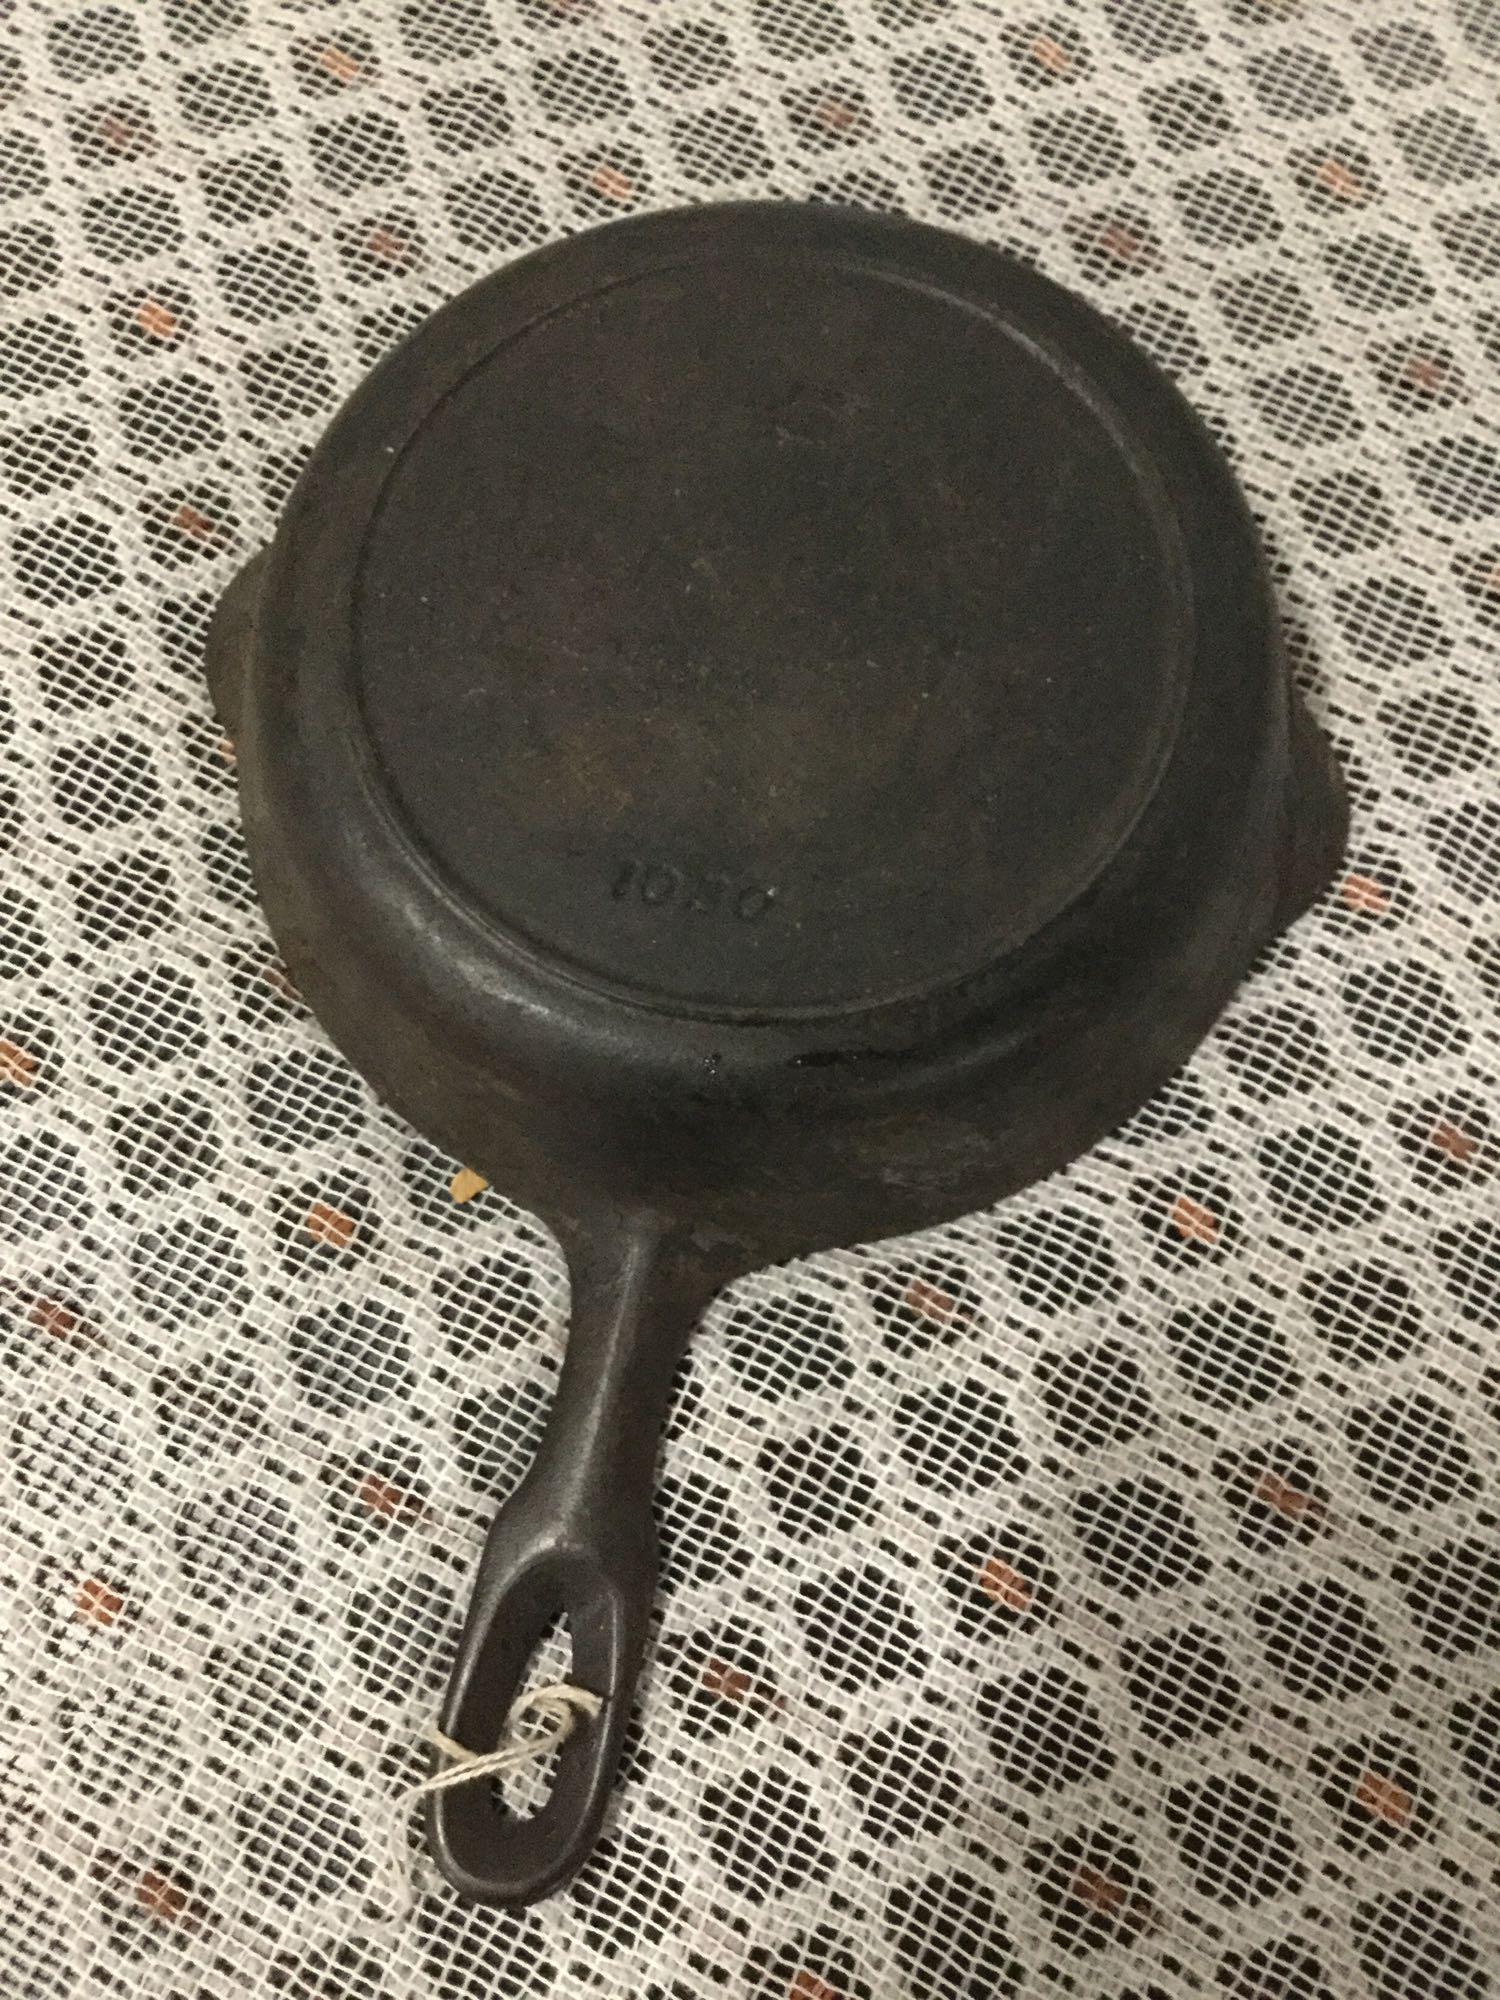 Collection of 3 Griswold small logo, and one Griswold Iron Mountain cast iron pans.